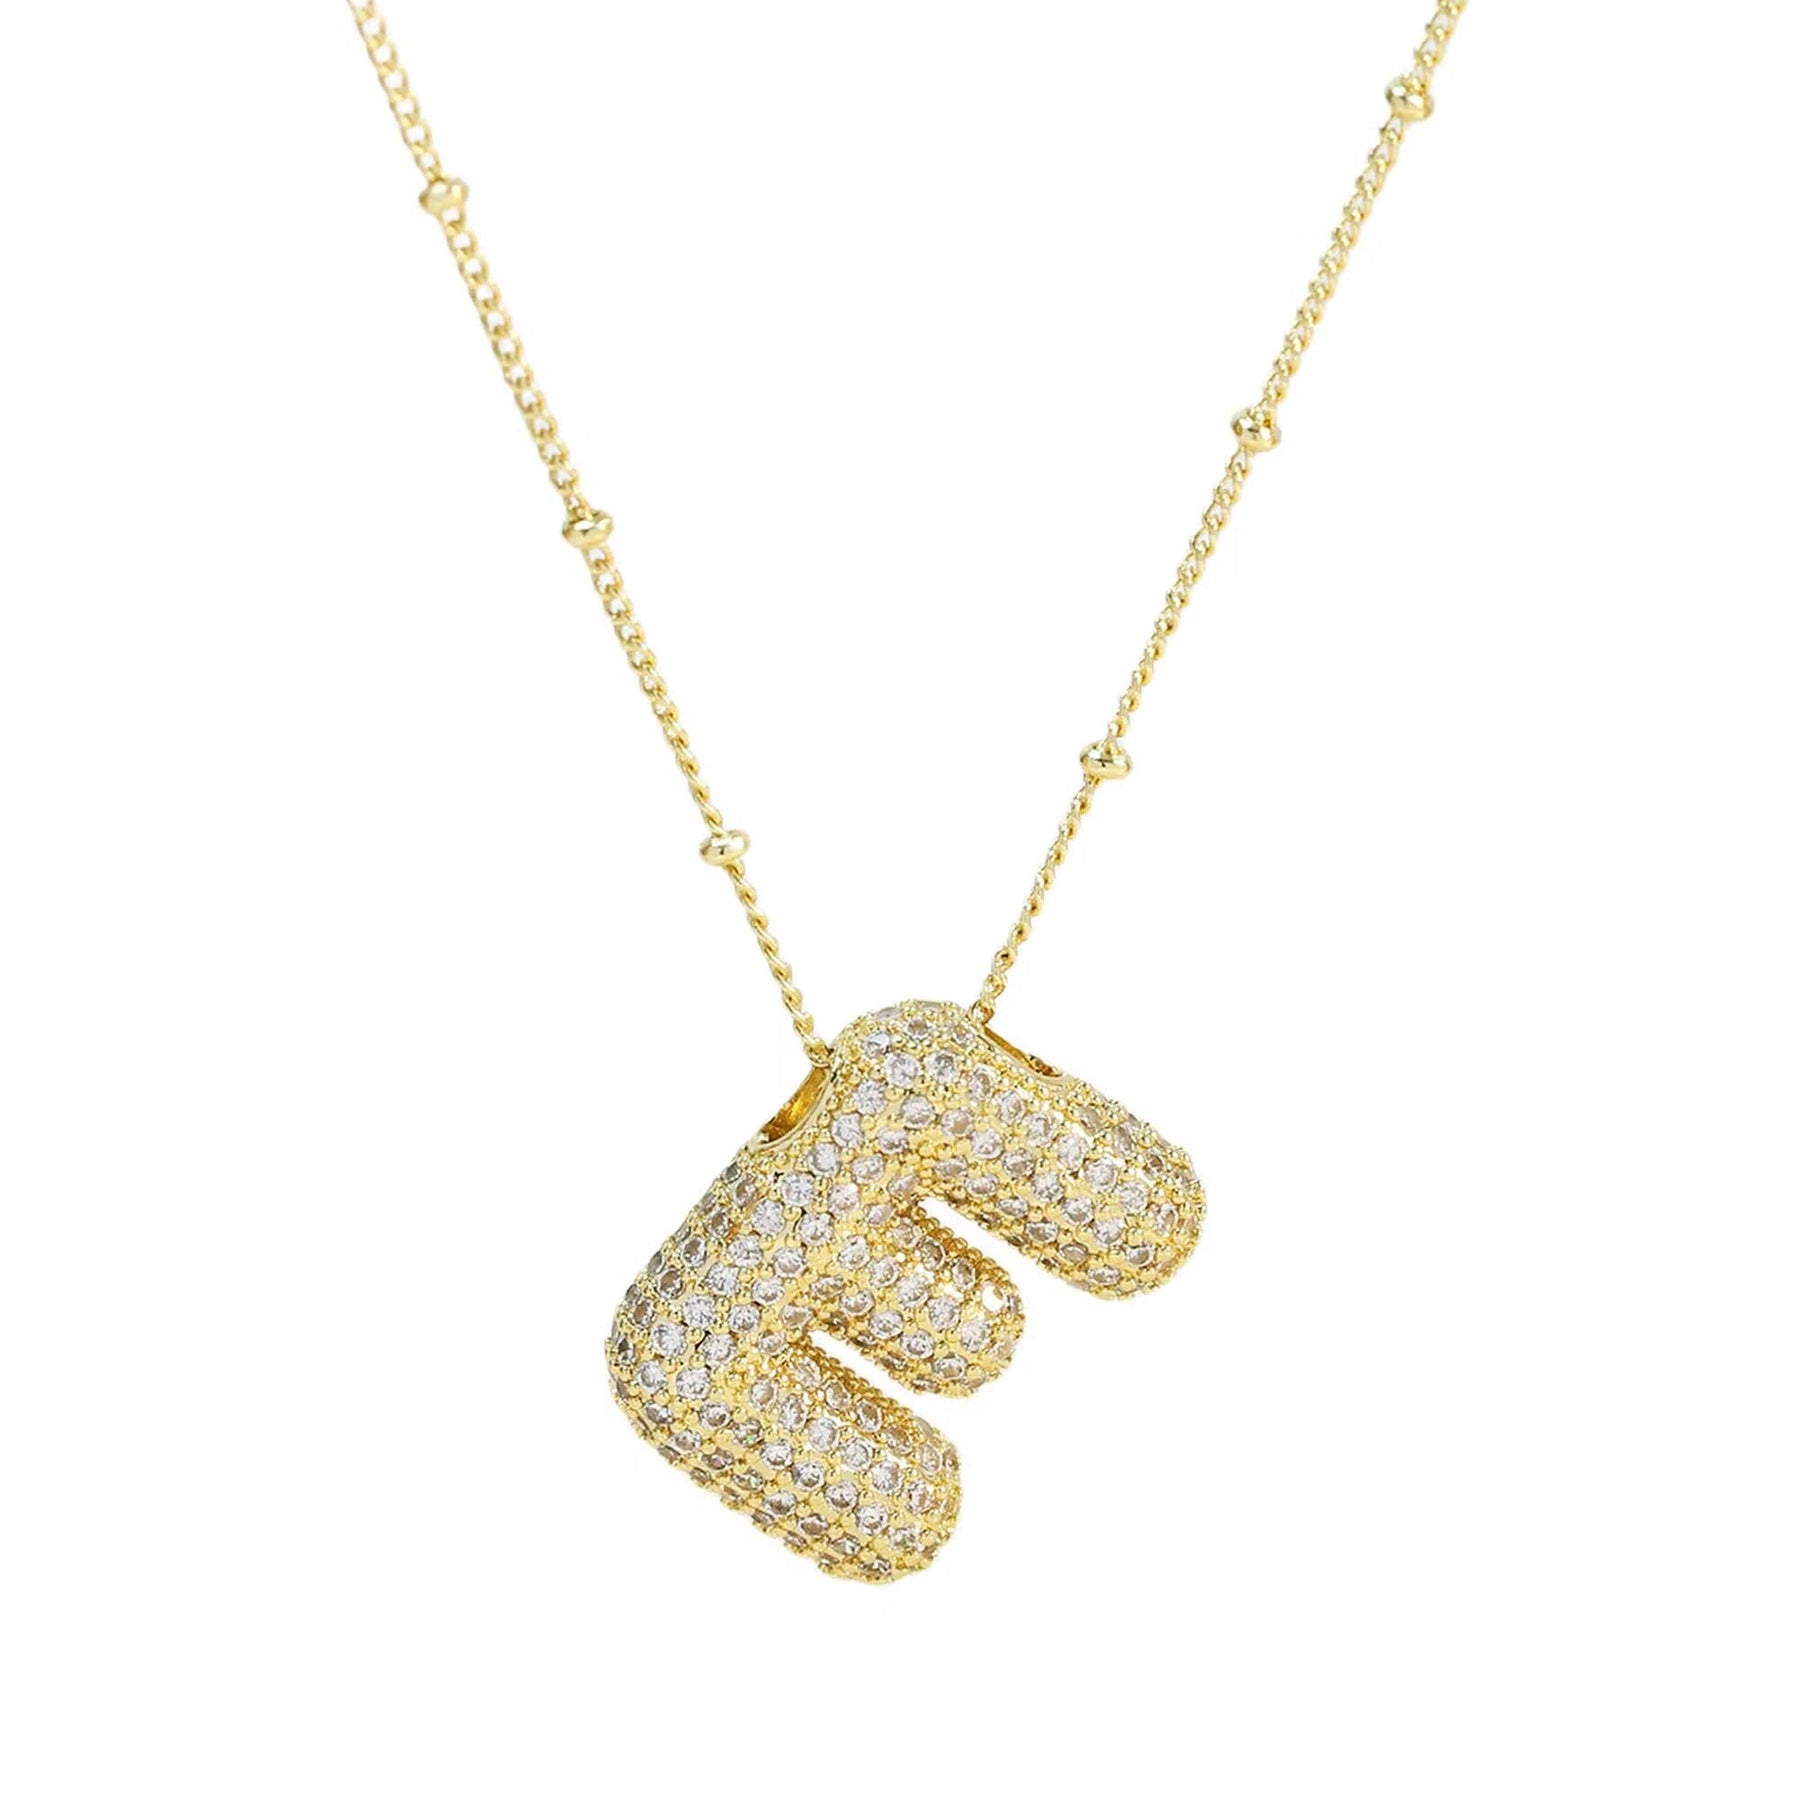 Initial Balloon Bubble 18K Gold Necklace